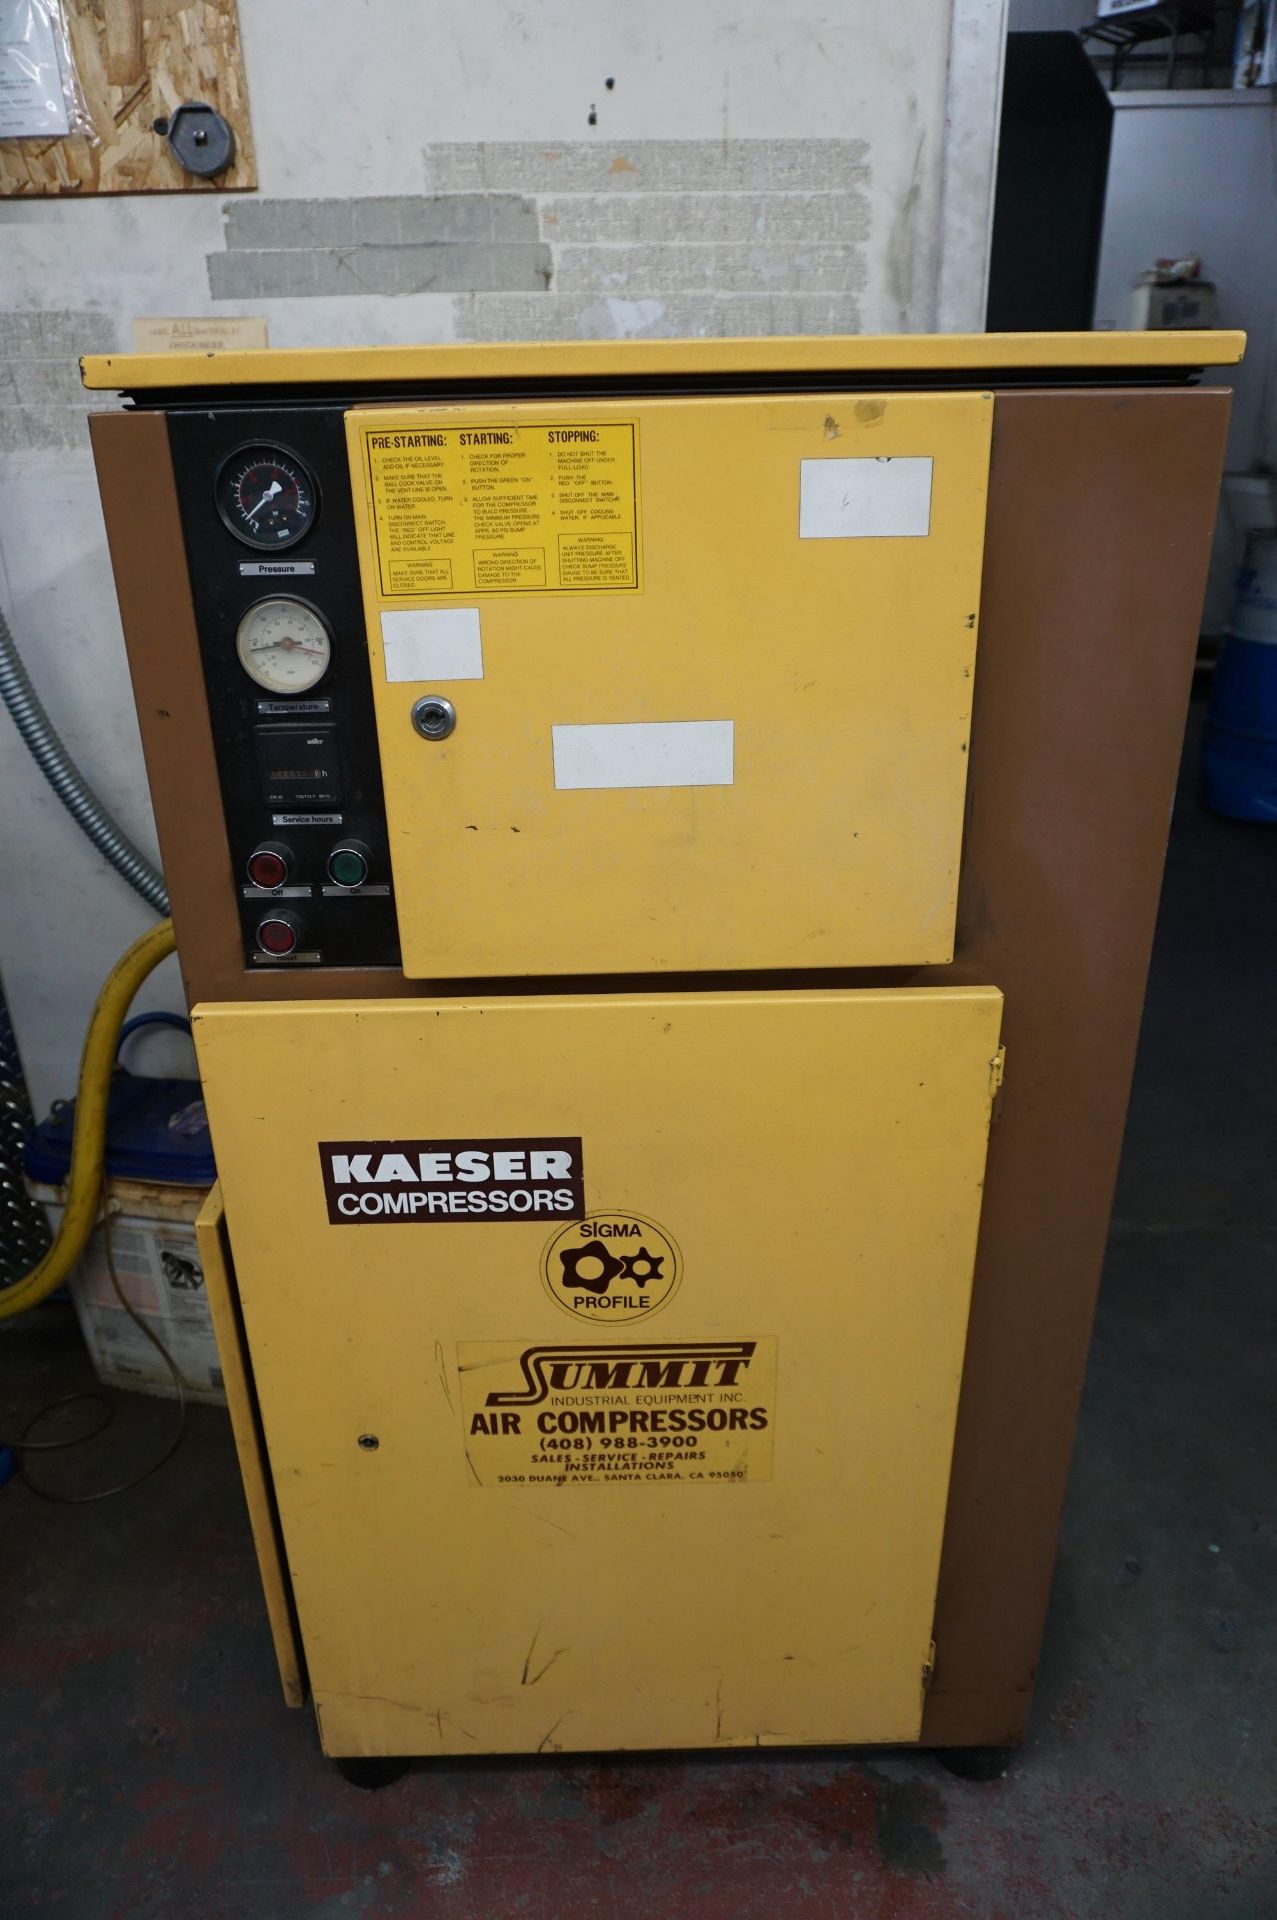 AIR COMPRESSOR SYSTEM FOR LASER TO INCLUDE: (1) KAESER SIGMA AIR COMPRESSOR, (1) AIR TANK, (1) - Image 2 of 7